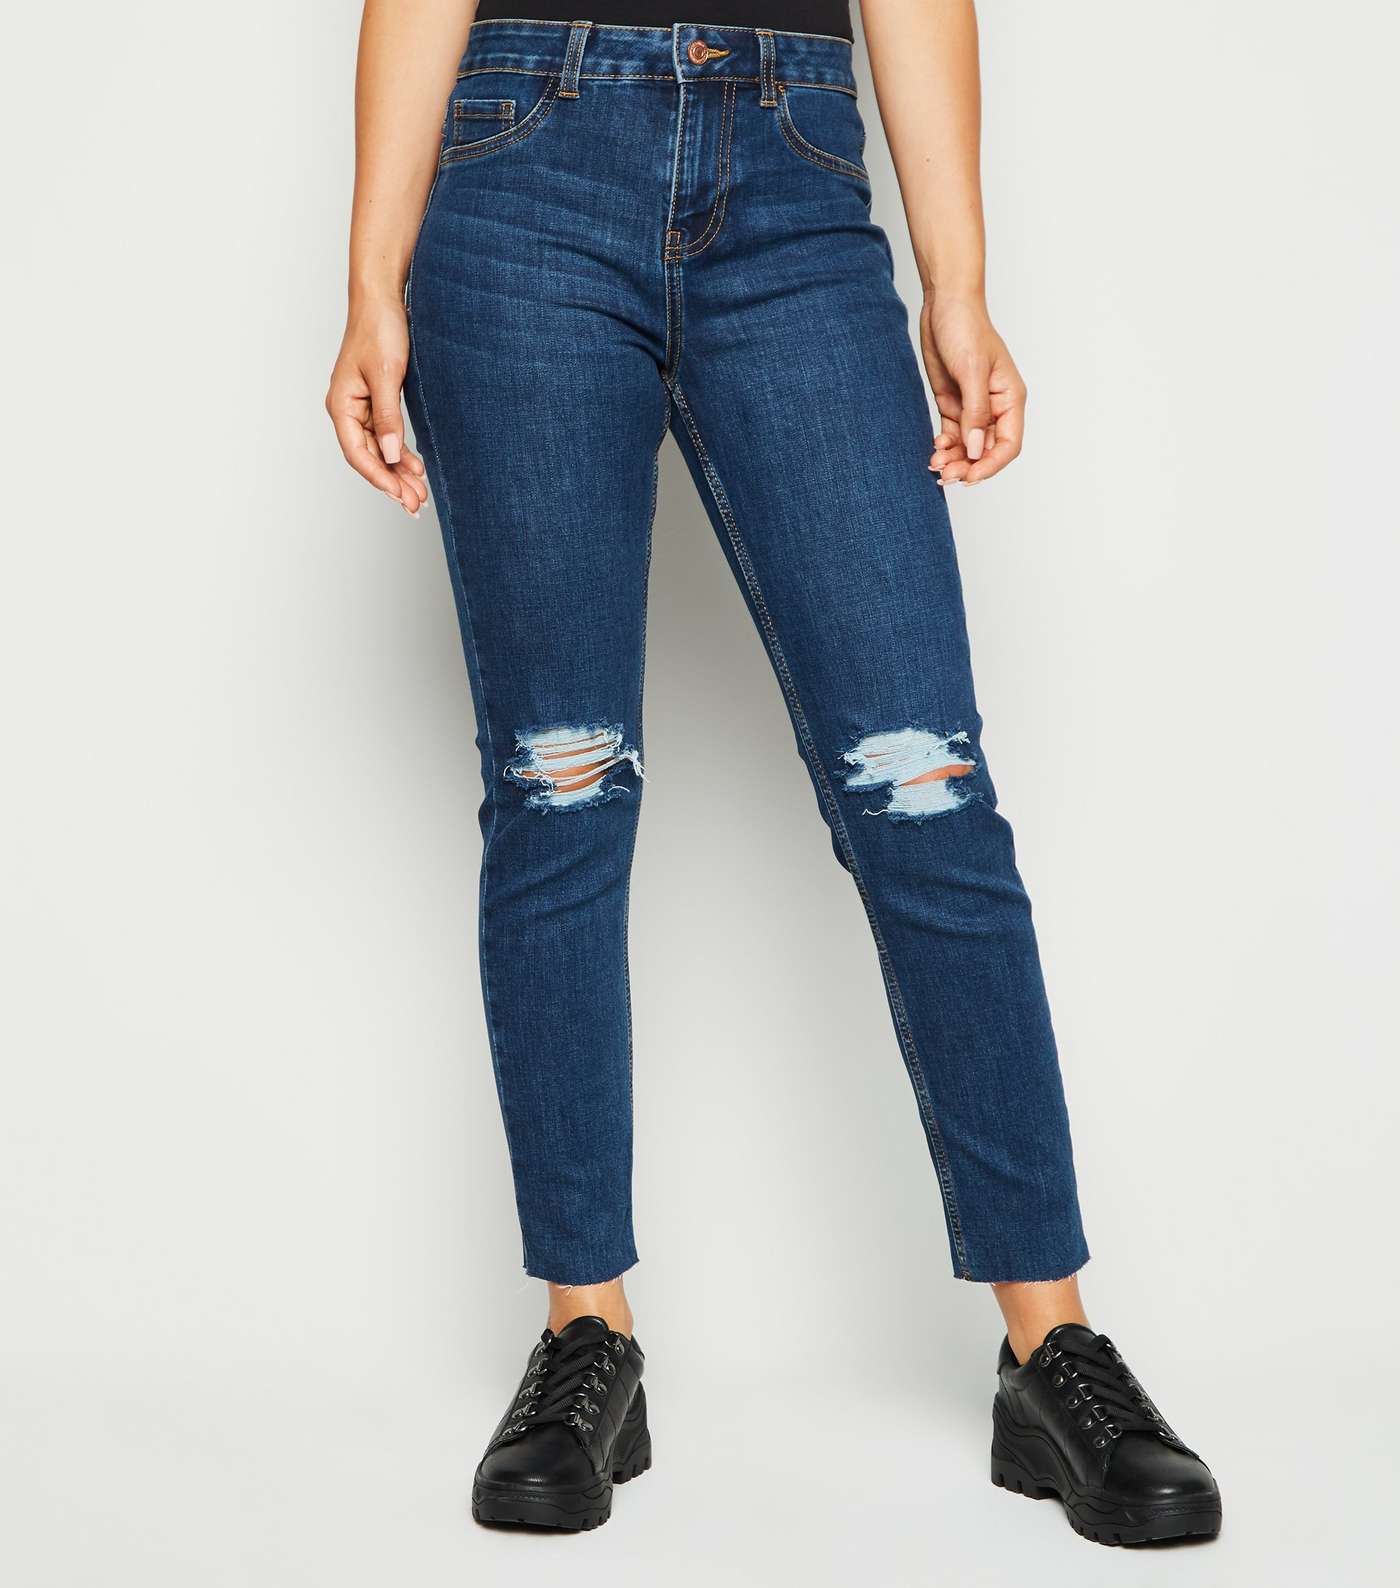 Petite Blue Rinse Wash Ripped Skinny Jeans Image 2